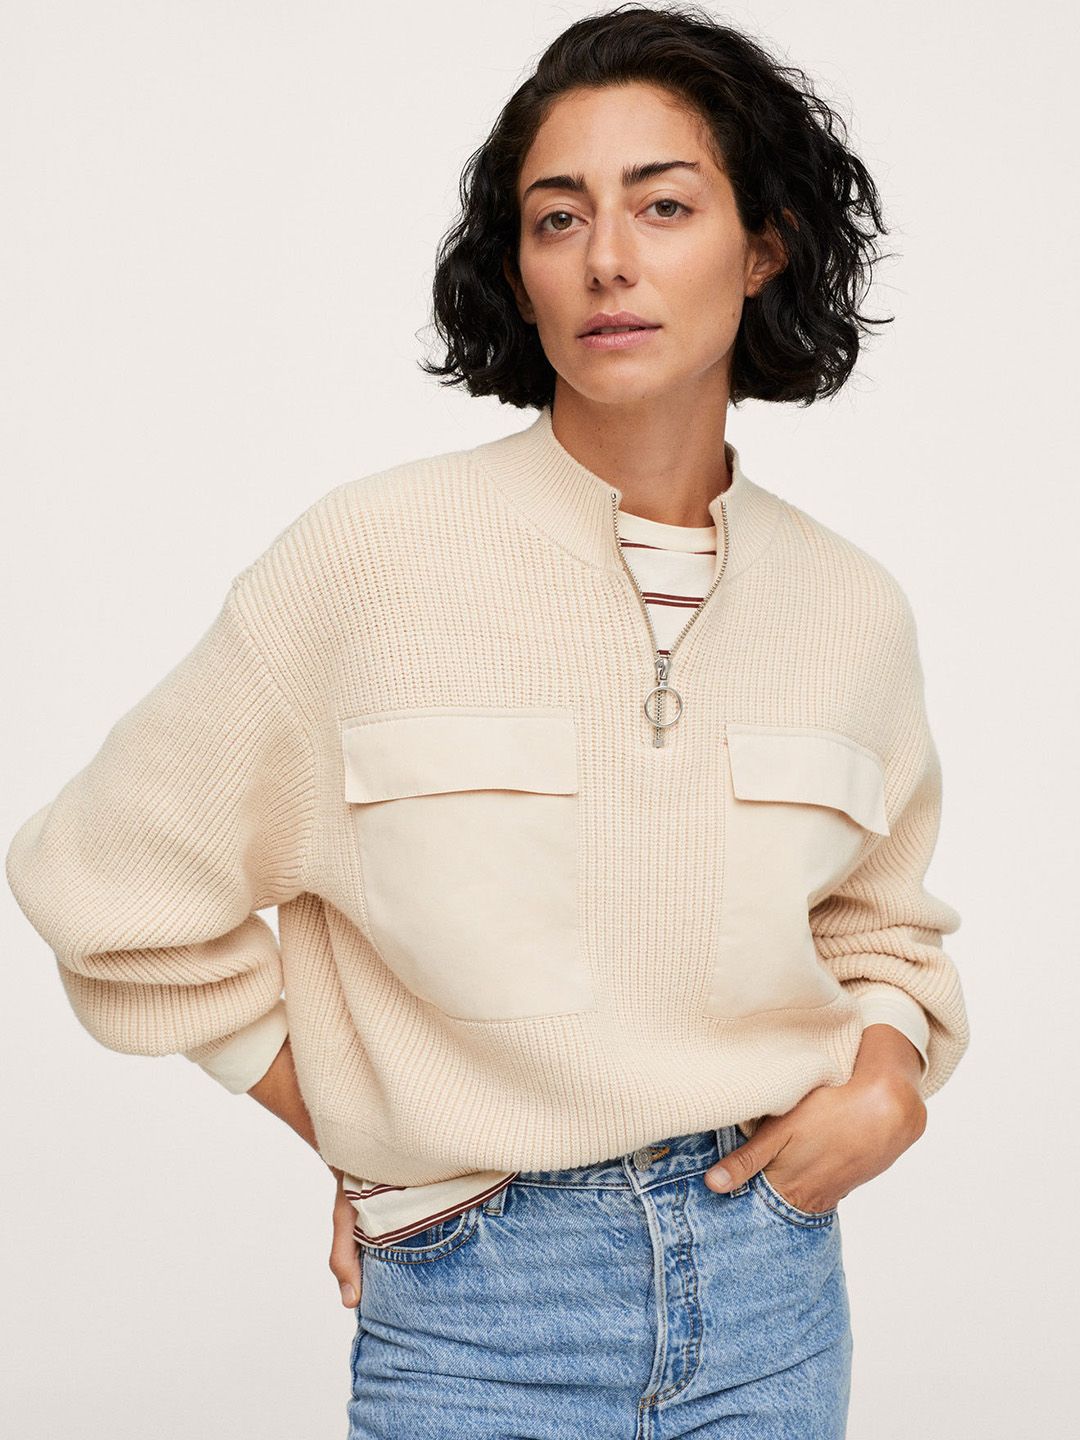 MANGO Women Cream-Coloured Self Striped Sweater Pullover with Puff Sleeves Price in India